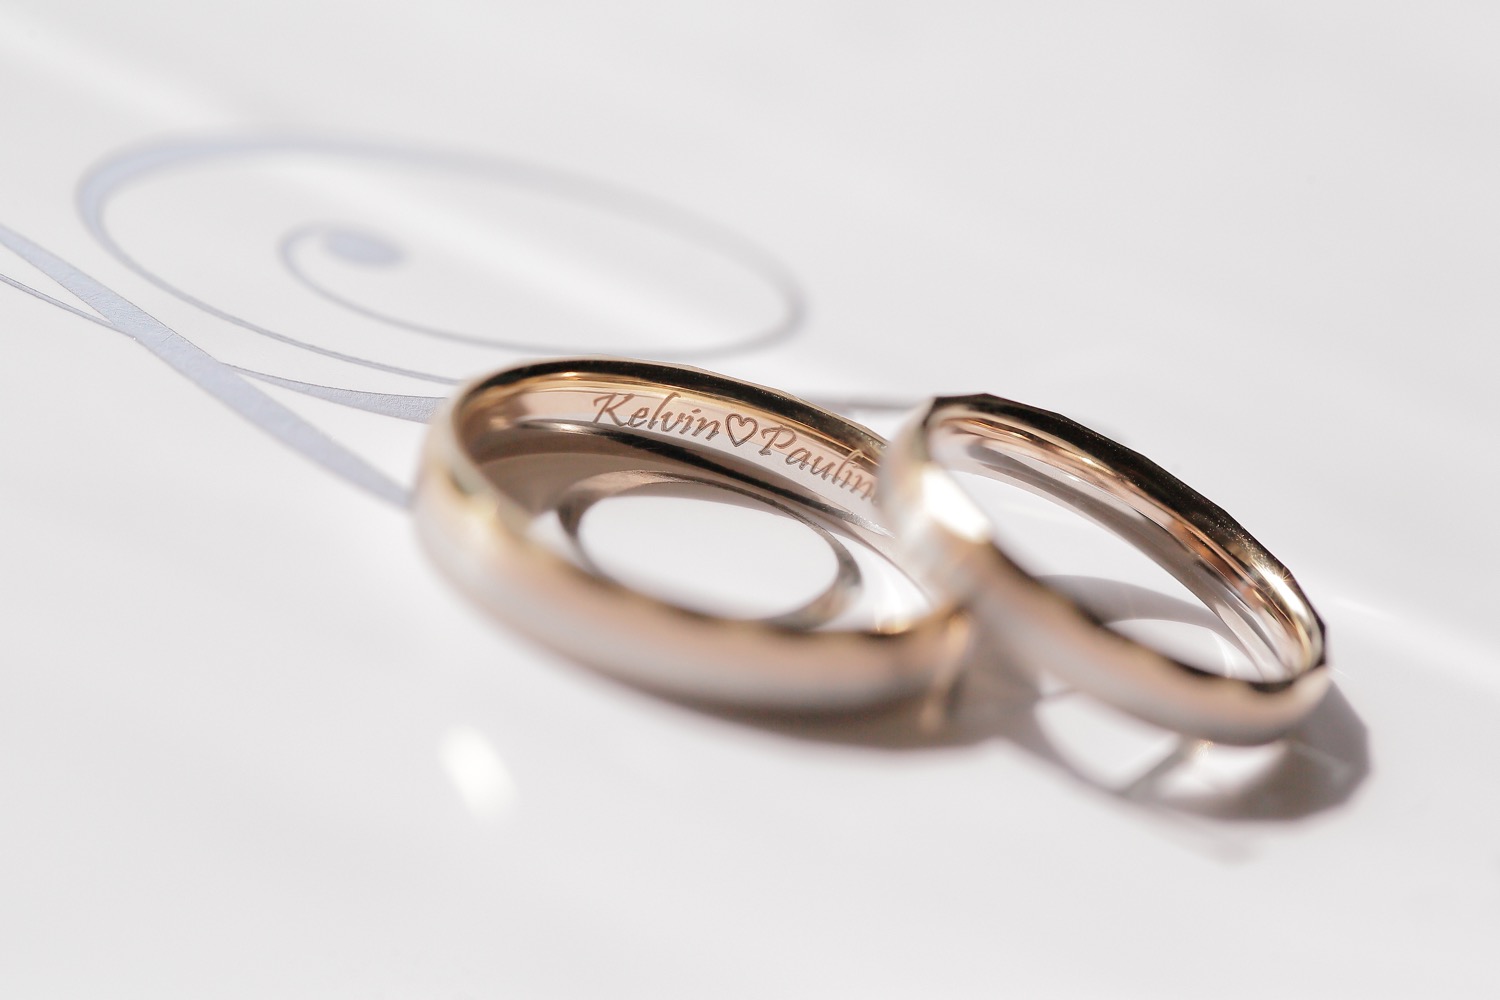 Closed-up Pre-Wedding Ring Shot